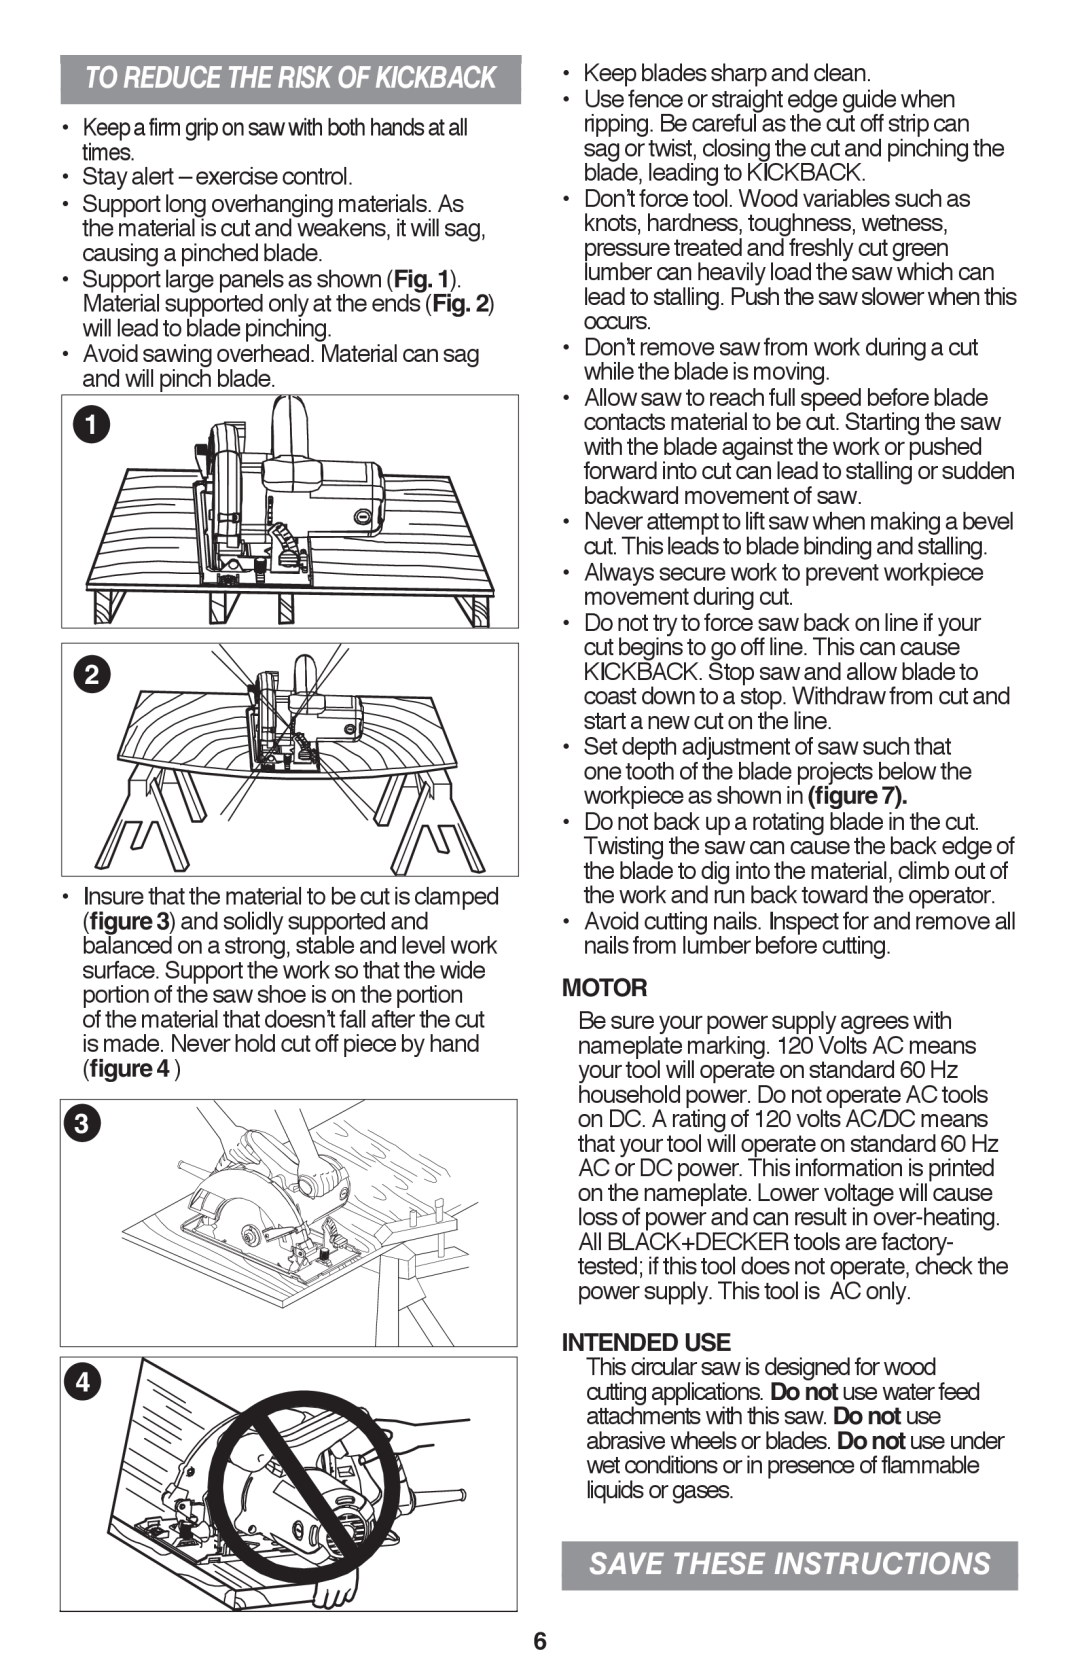 Black & Decker CS1015 instruction manual Motor, Intended Use, to reduce the risk of kickback, Save these instructions 